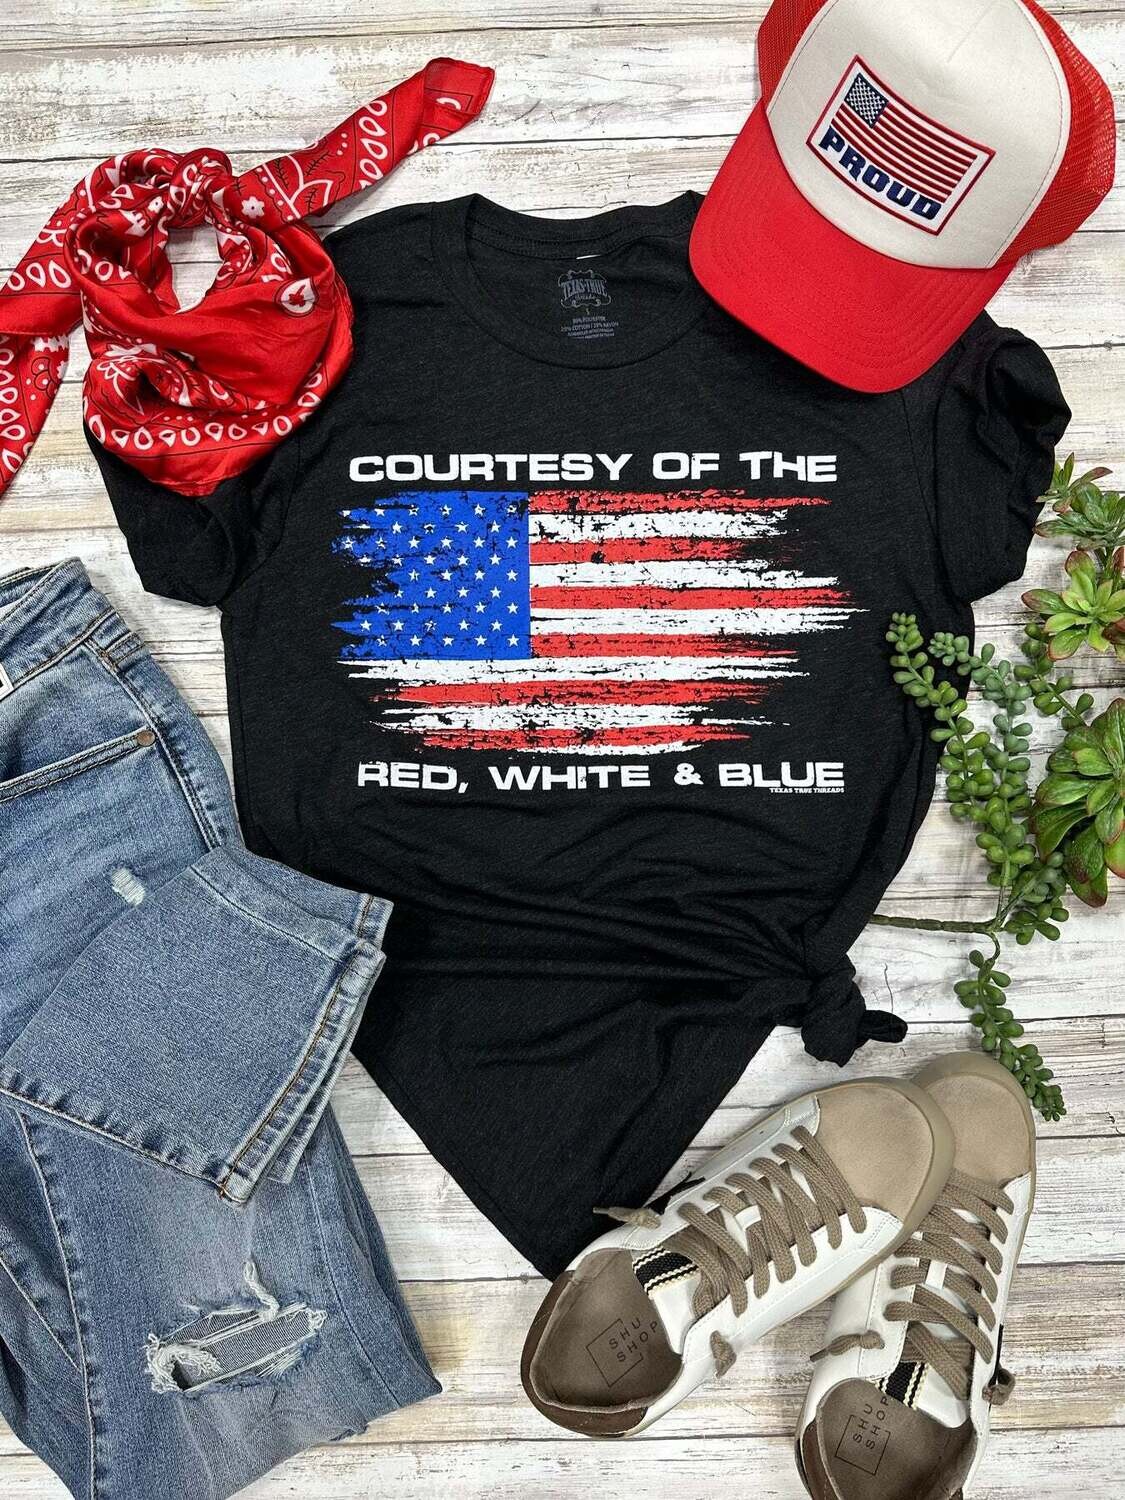 Courtesy of The Red, White & Blue Tees